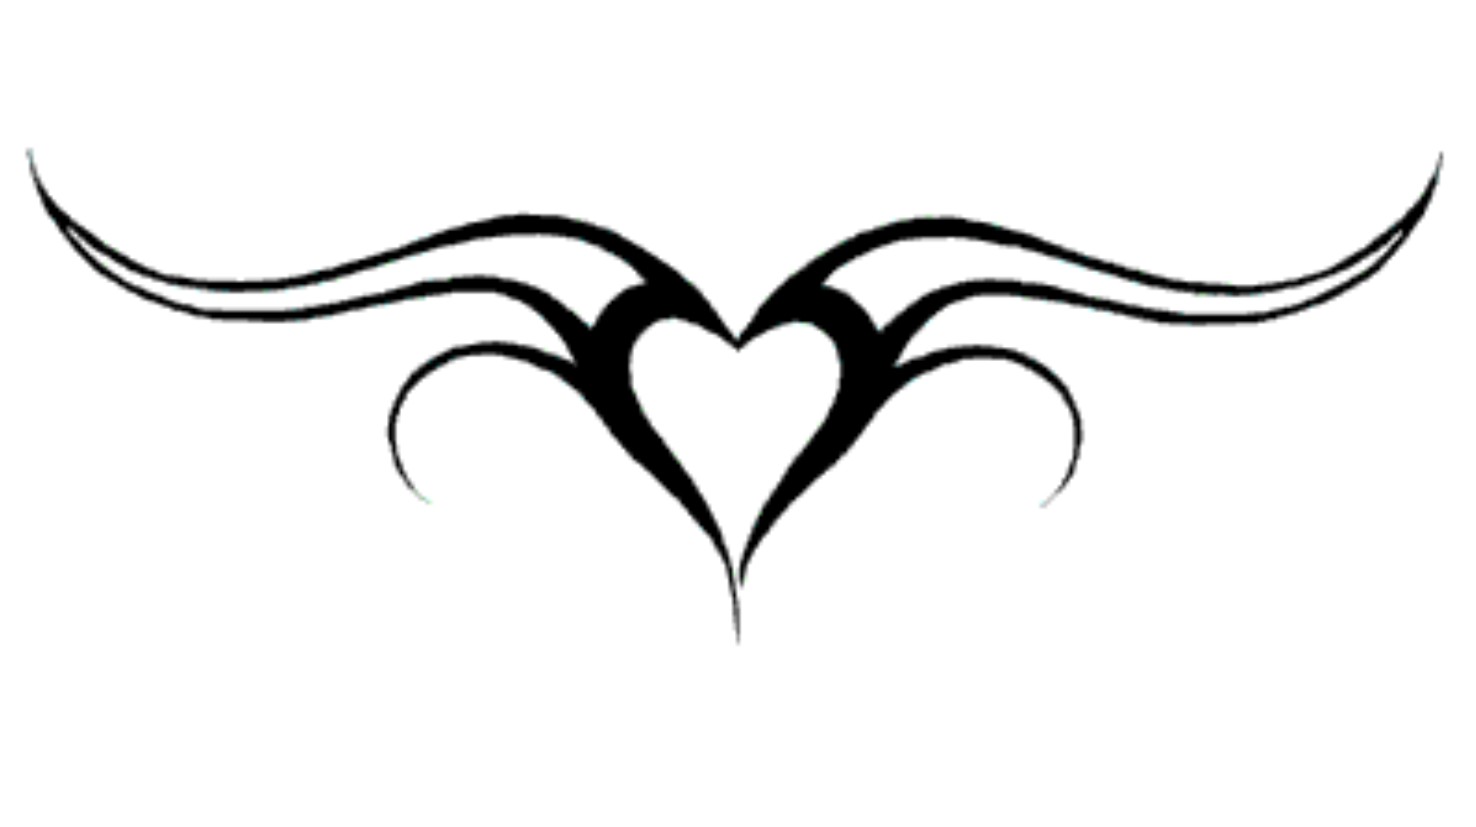 Heart Designs Pictures - ClipArt Best